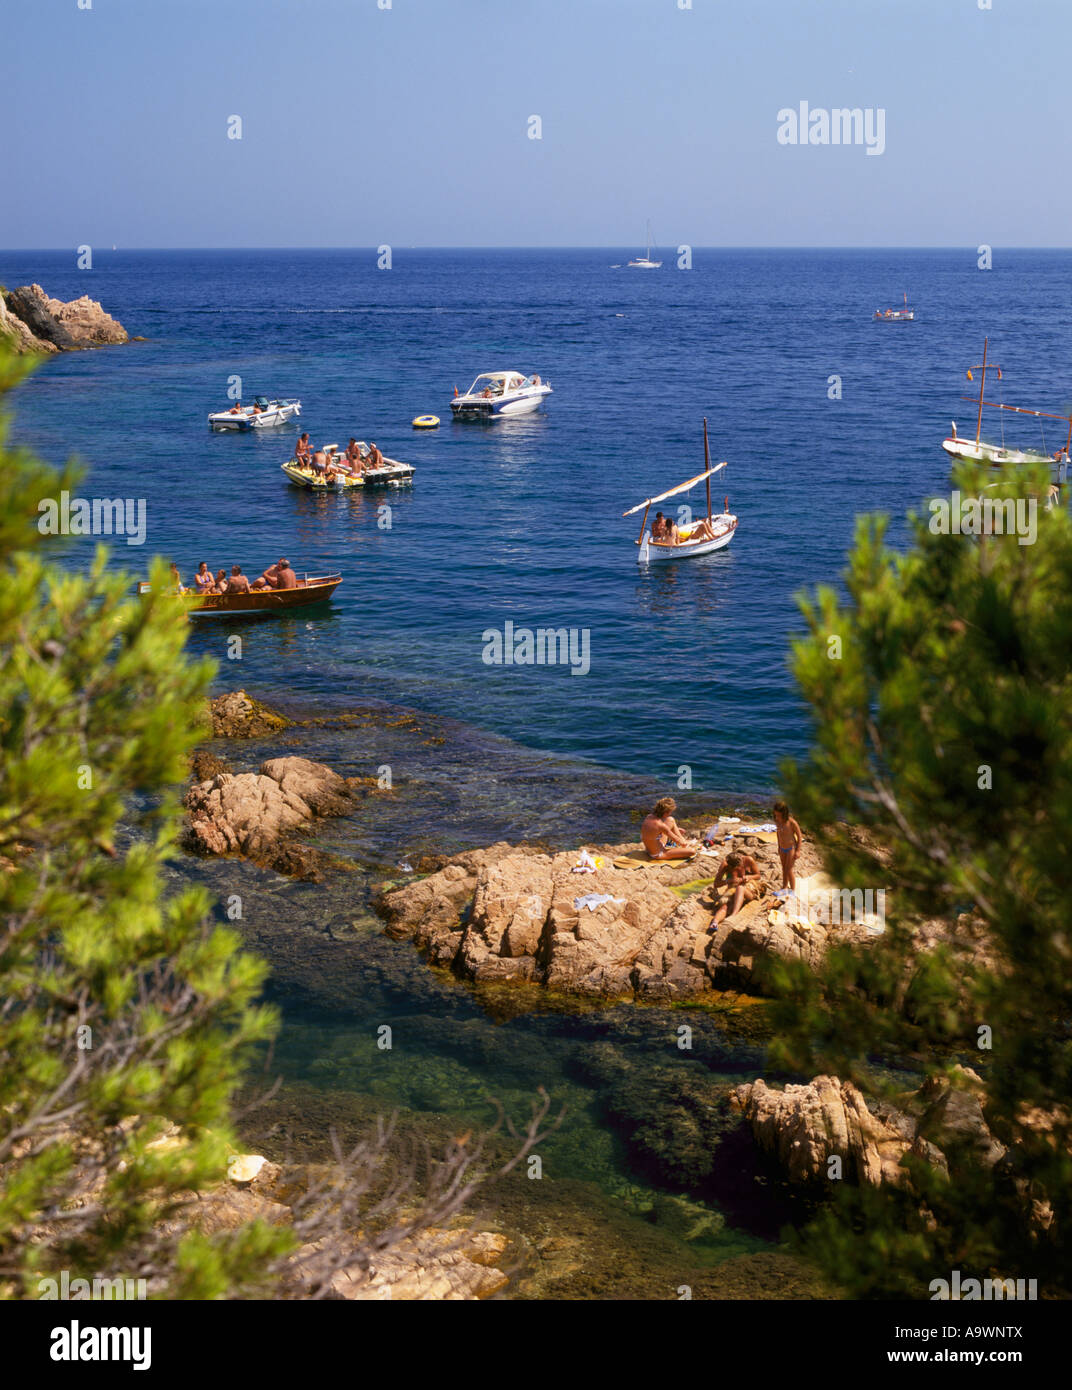 Boats in a sheltered cove at Agua Gelida on the Costa Brava near Palafrugell Catalonia Spain Stock Photo